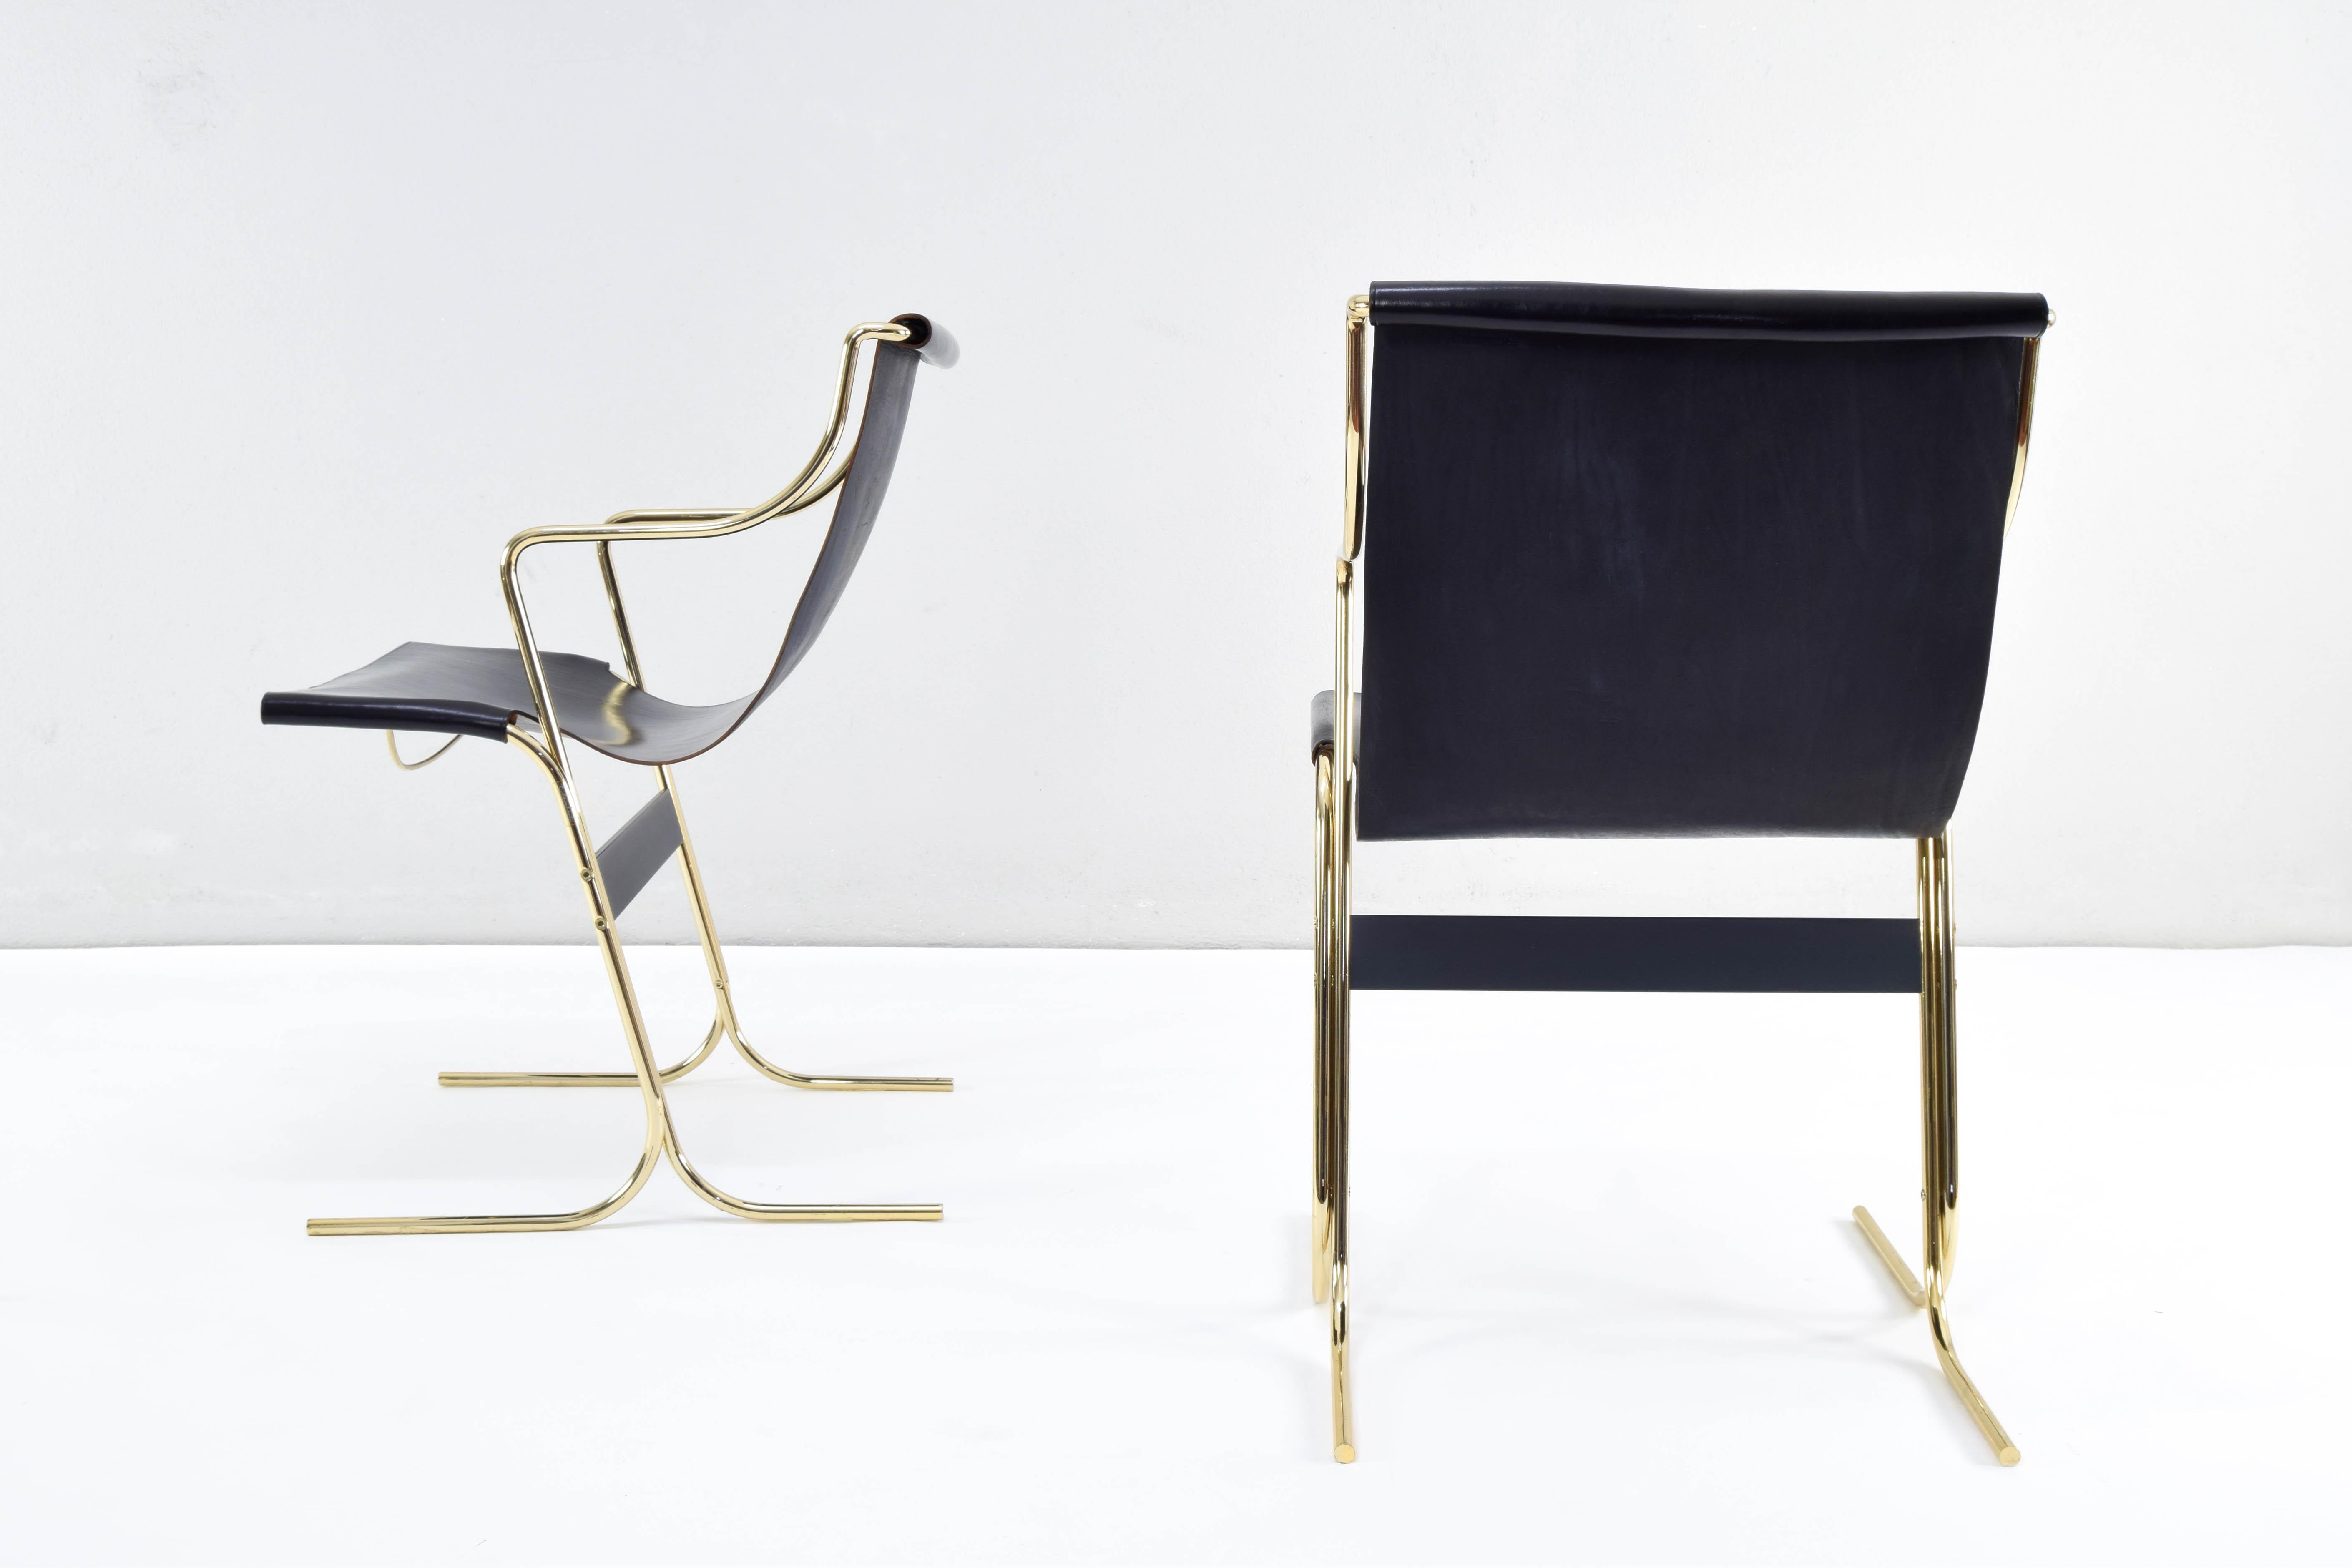 Italian Pair of Leather and Brass Cigno Chairs by Ross Littell and Kelly to Padova Italy